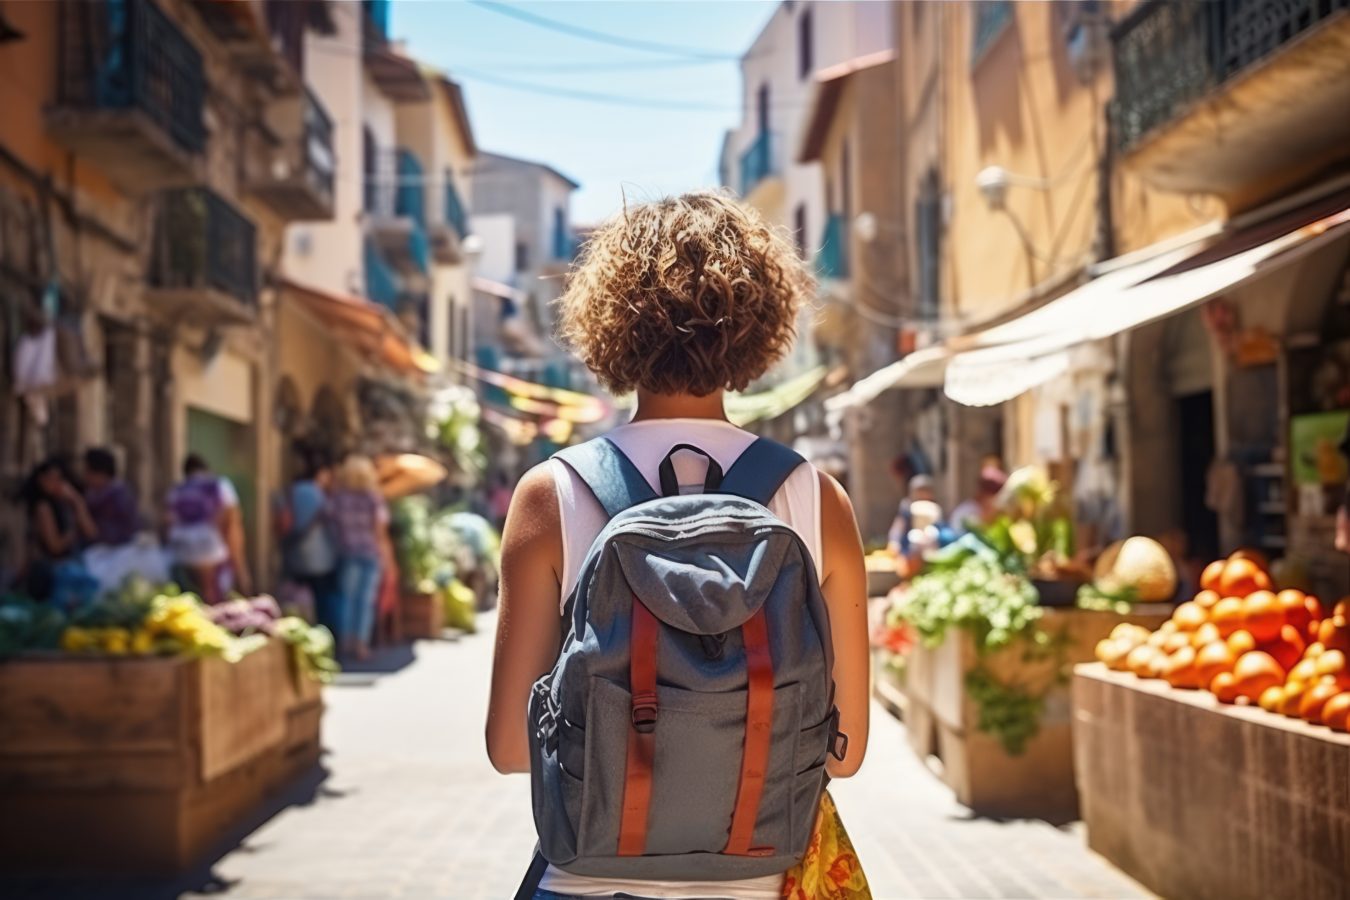 Traveler in street of old town in Spain. Young backpacker tourist in solo travel.